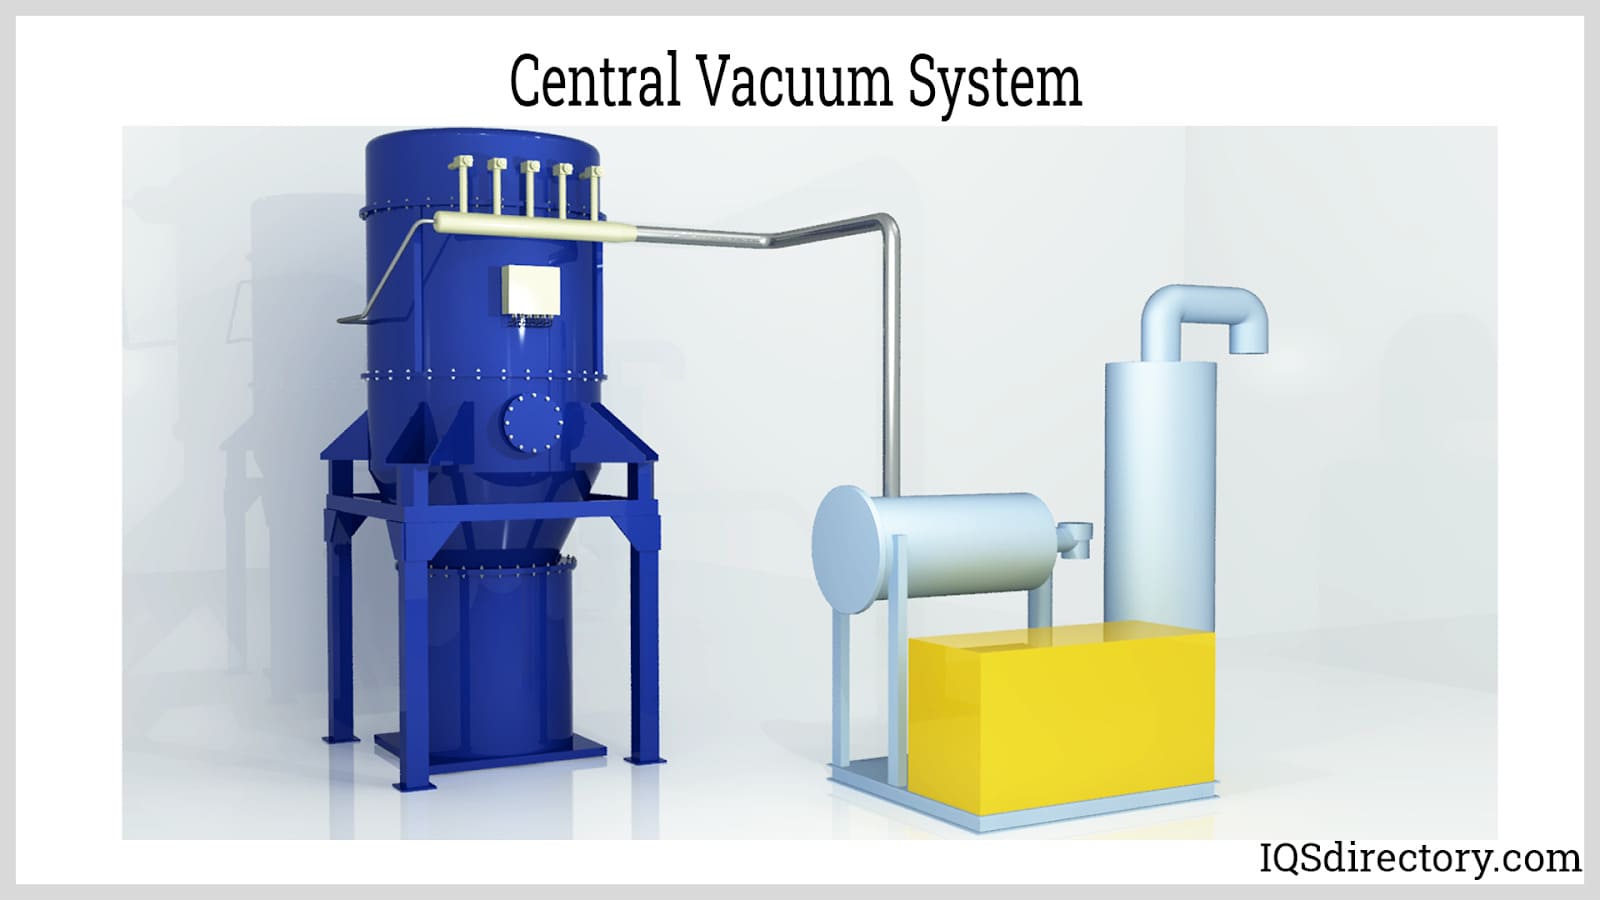 Central Vacuum System: What is it & How Does It Work?